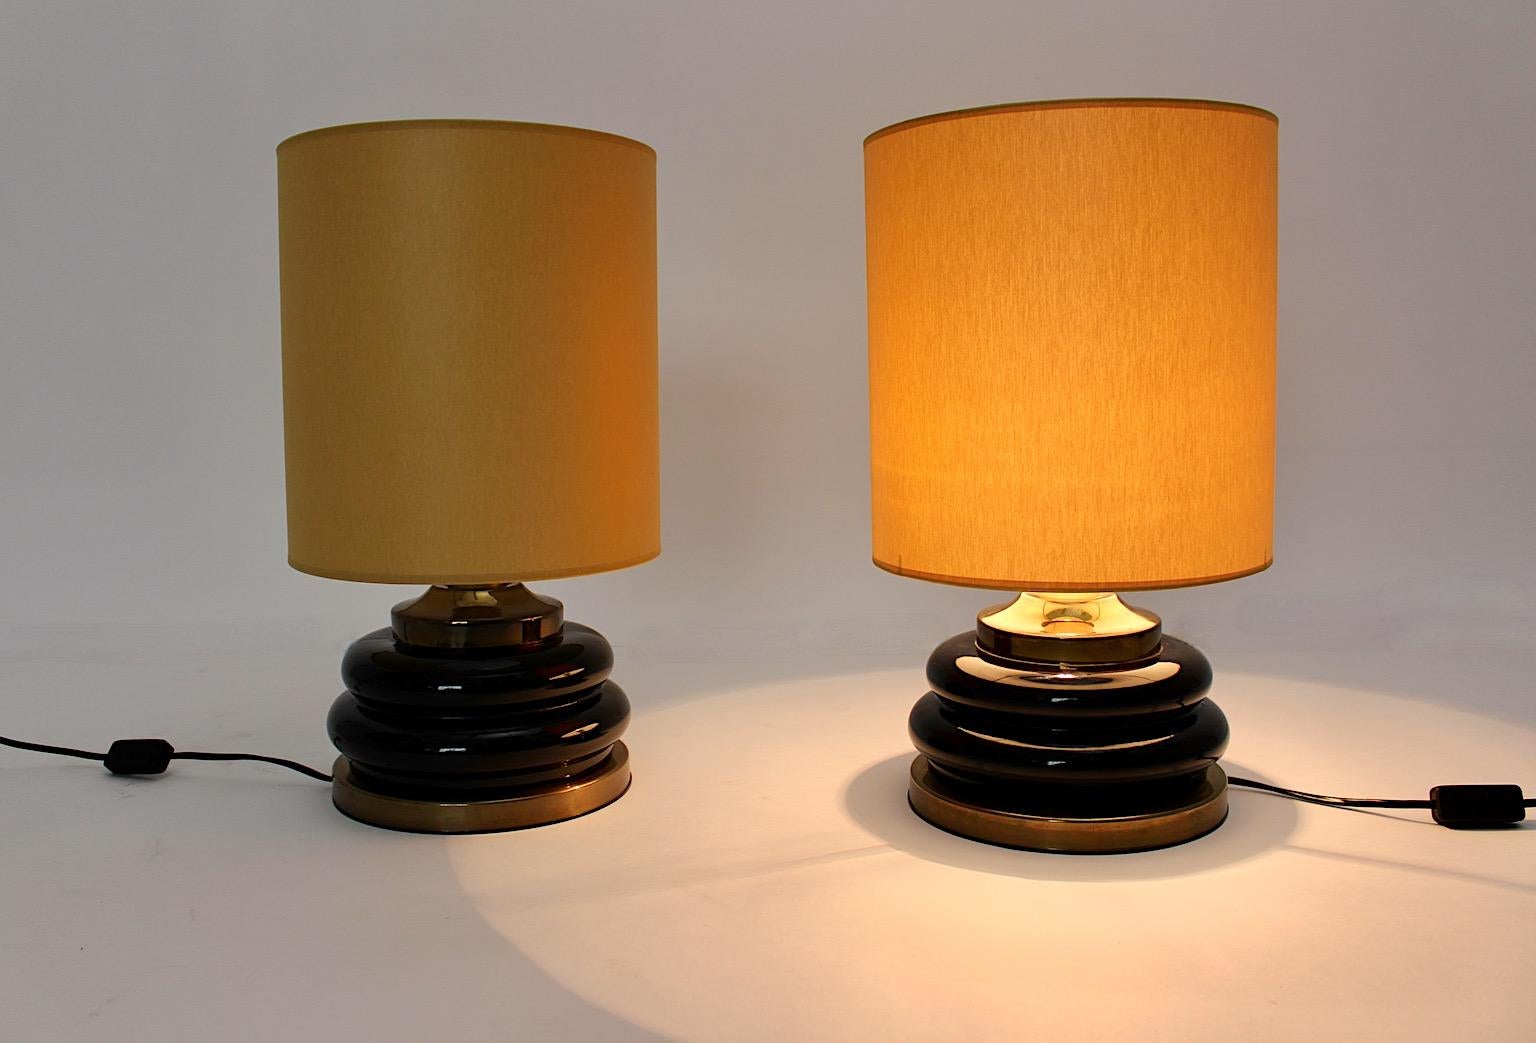 Modernist vintage table lamps duo pair from brown and gold glass, which was designed and manufactured Italy, 1970s.
An amazing pair of table lamps with rounded edges at the glass base with brass and plastic details give the pair of table lamps a